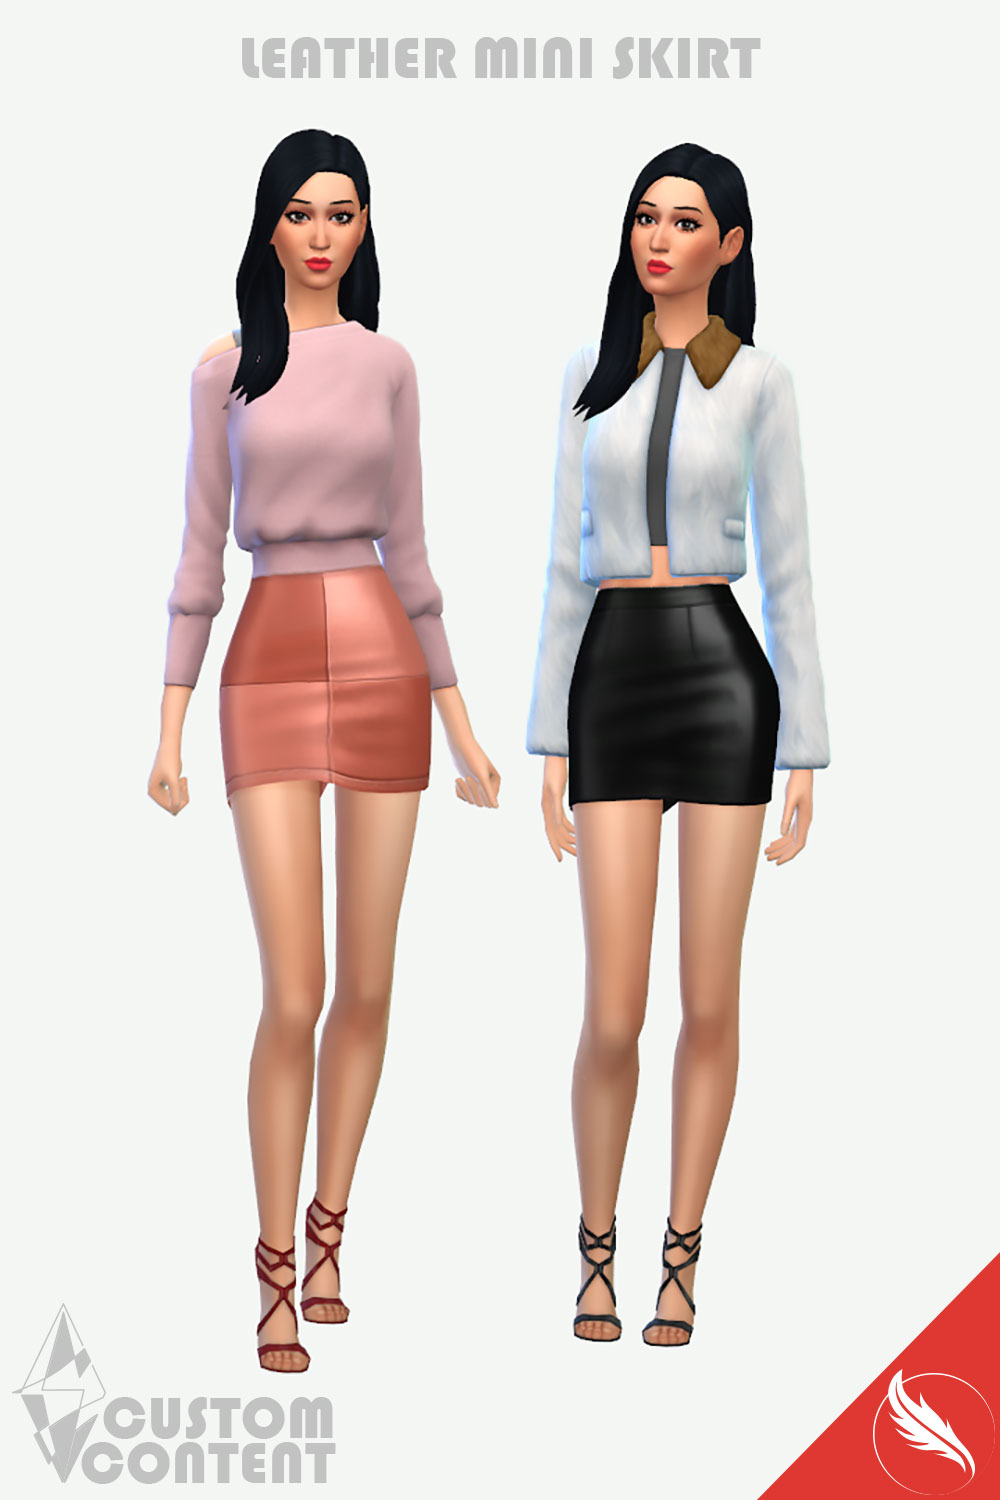 The Sims 4 Leather Mini Skirt Custom Content